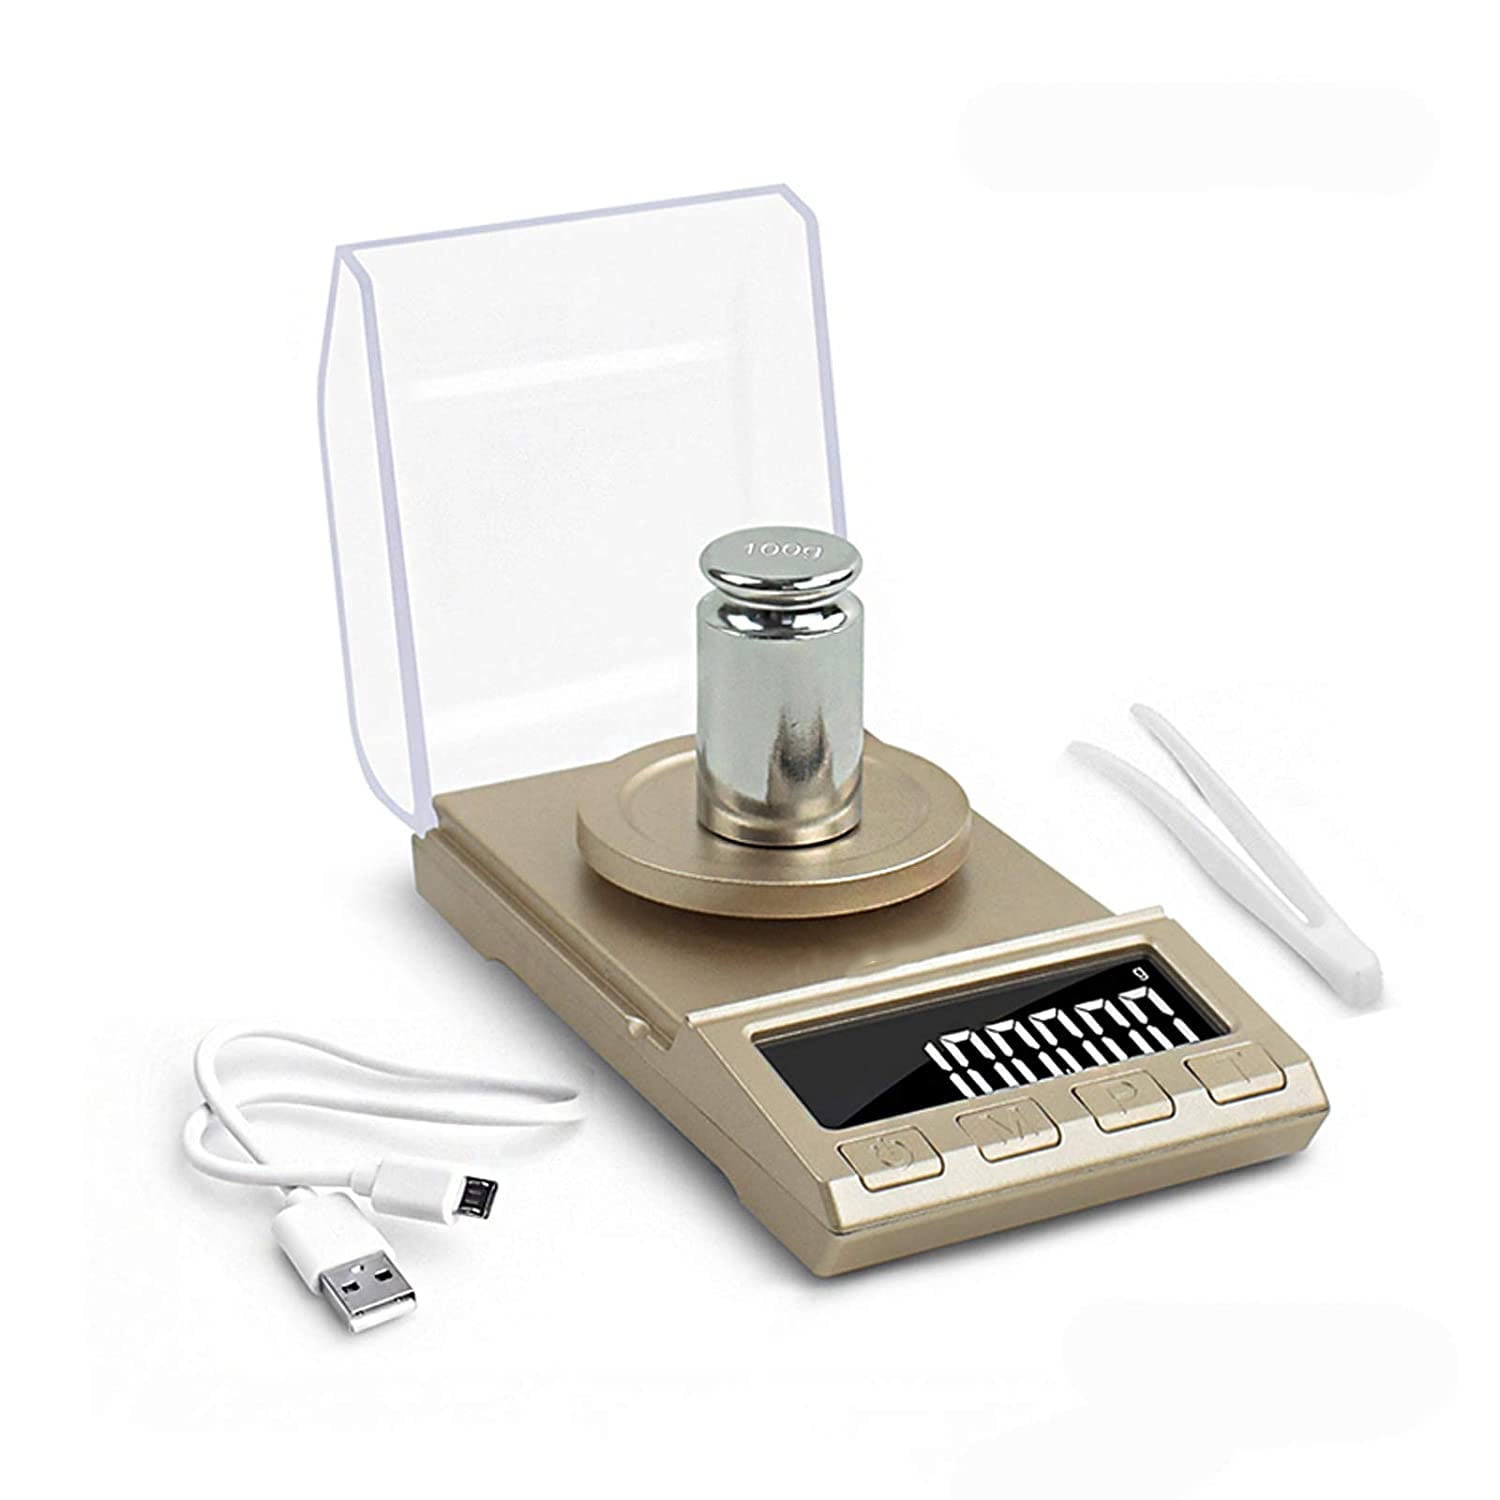 Digital Milligram Scale 50 x 0.001g Portable Lab Jewelry Reload Powder Gold Scales with Calibration Tare Weights 8068G-50G 